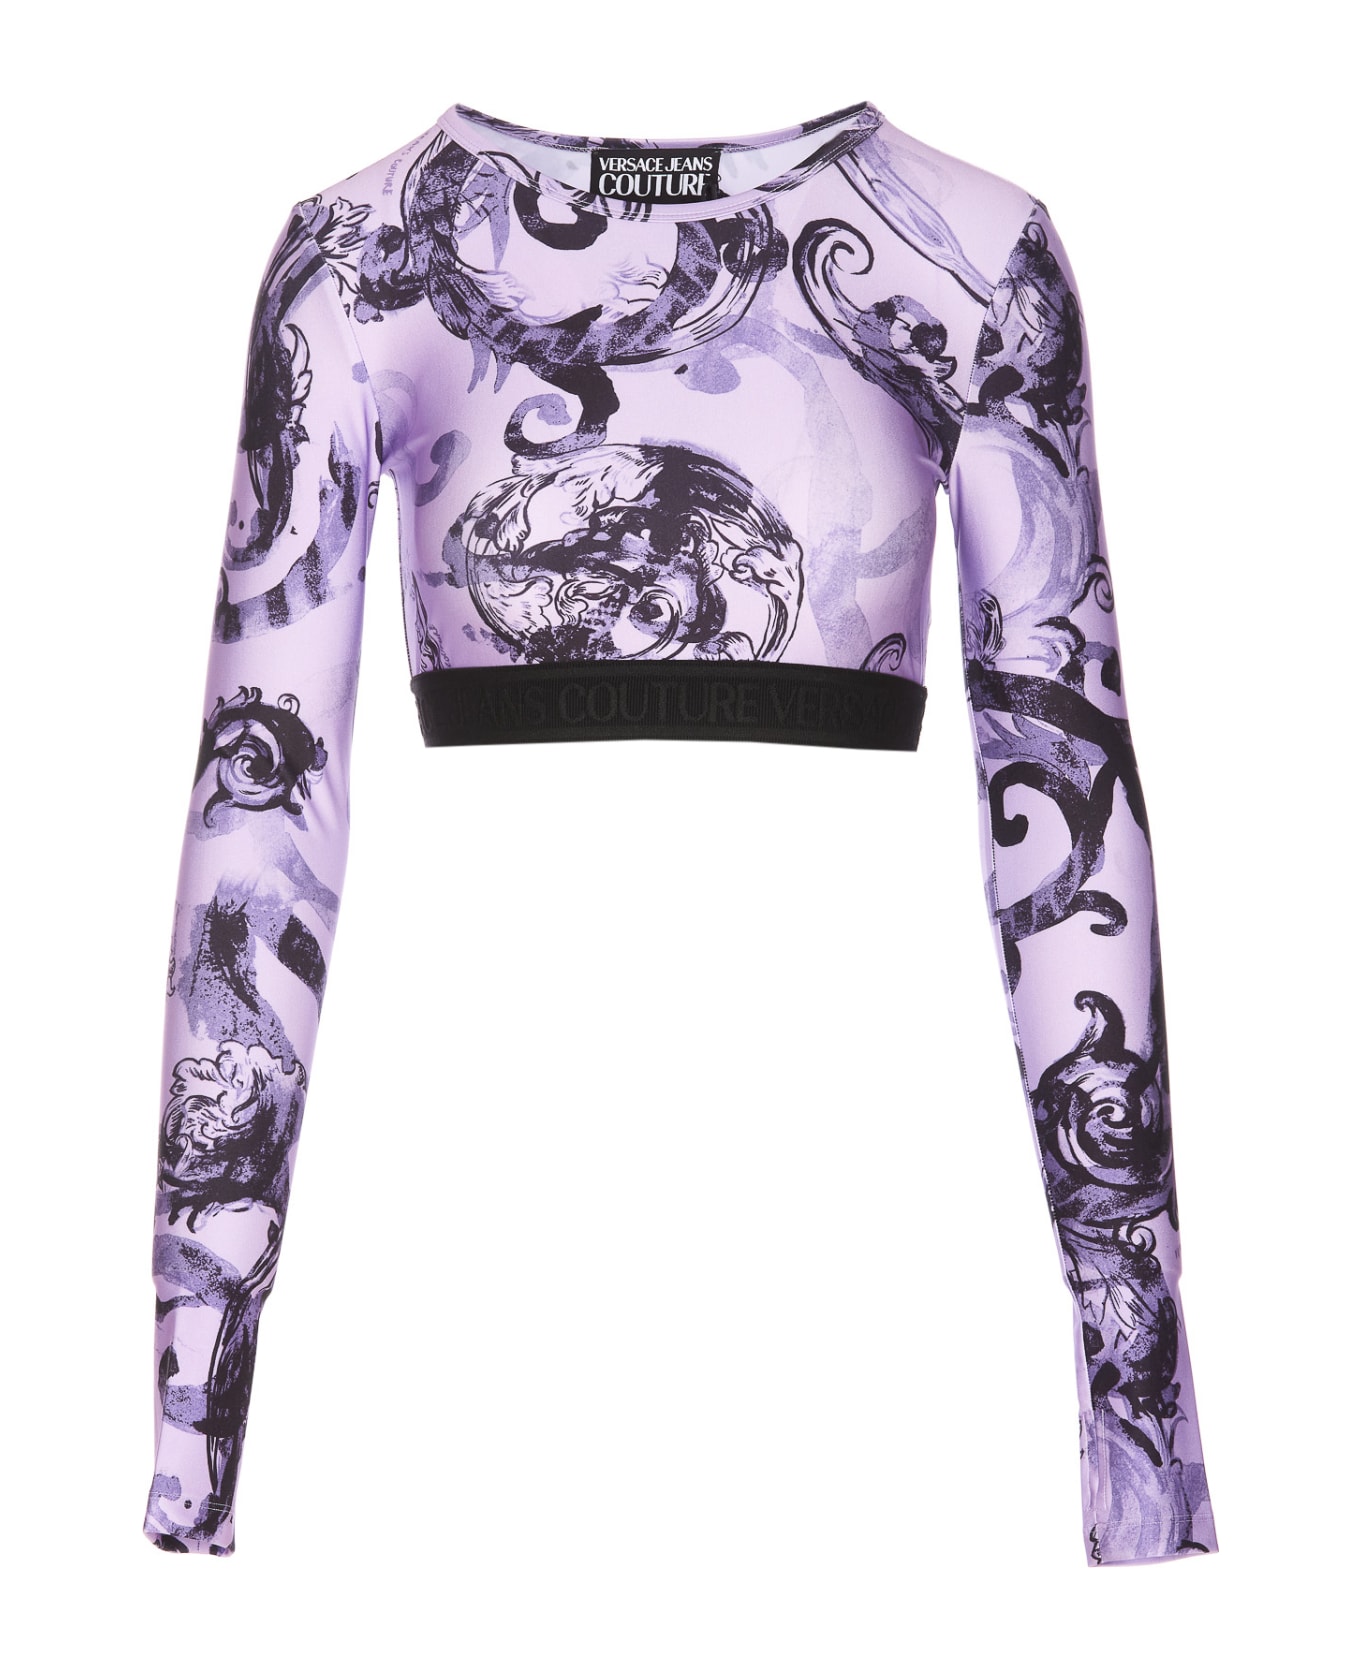 Versace Jeans Couture Watercolor Couture Short Top - Purple トップス